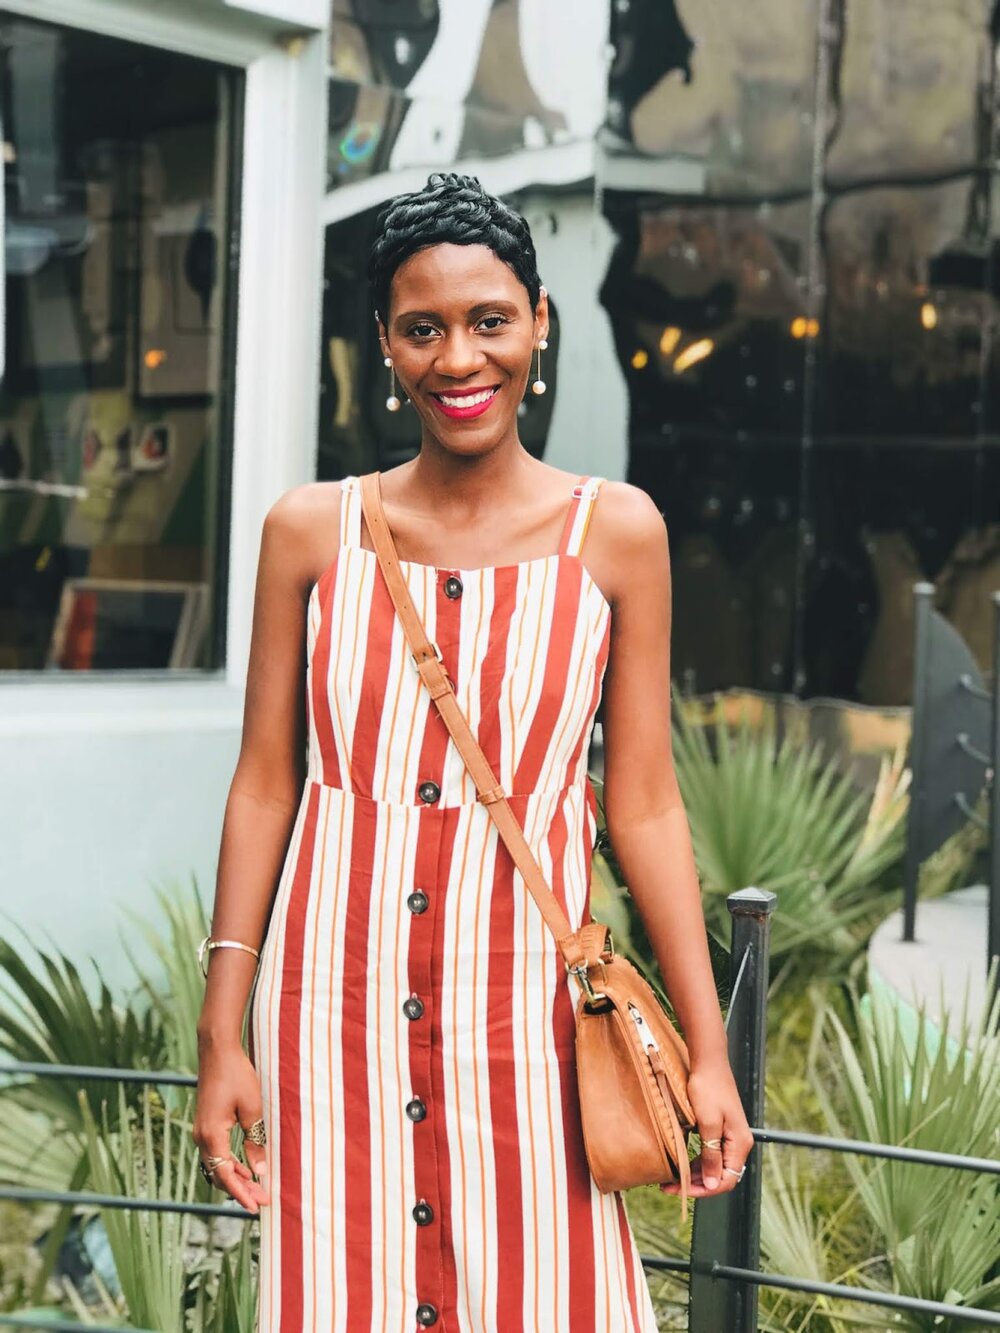 Life From The Outside: Our Days Hanging Out In The City + I Paid HOW MUCH For This Dress?